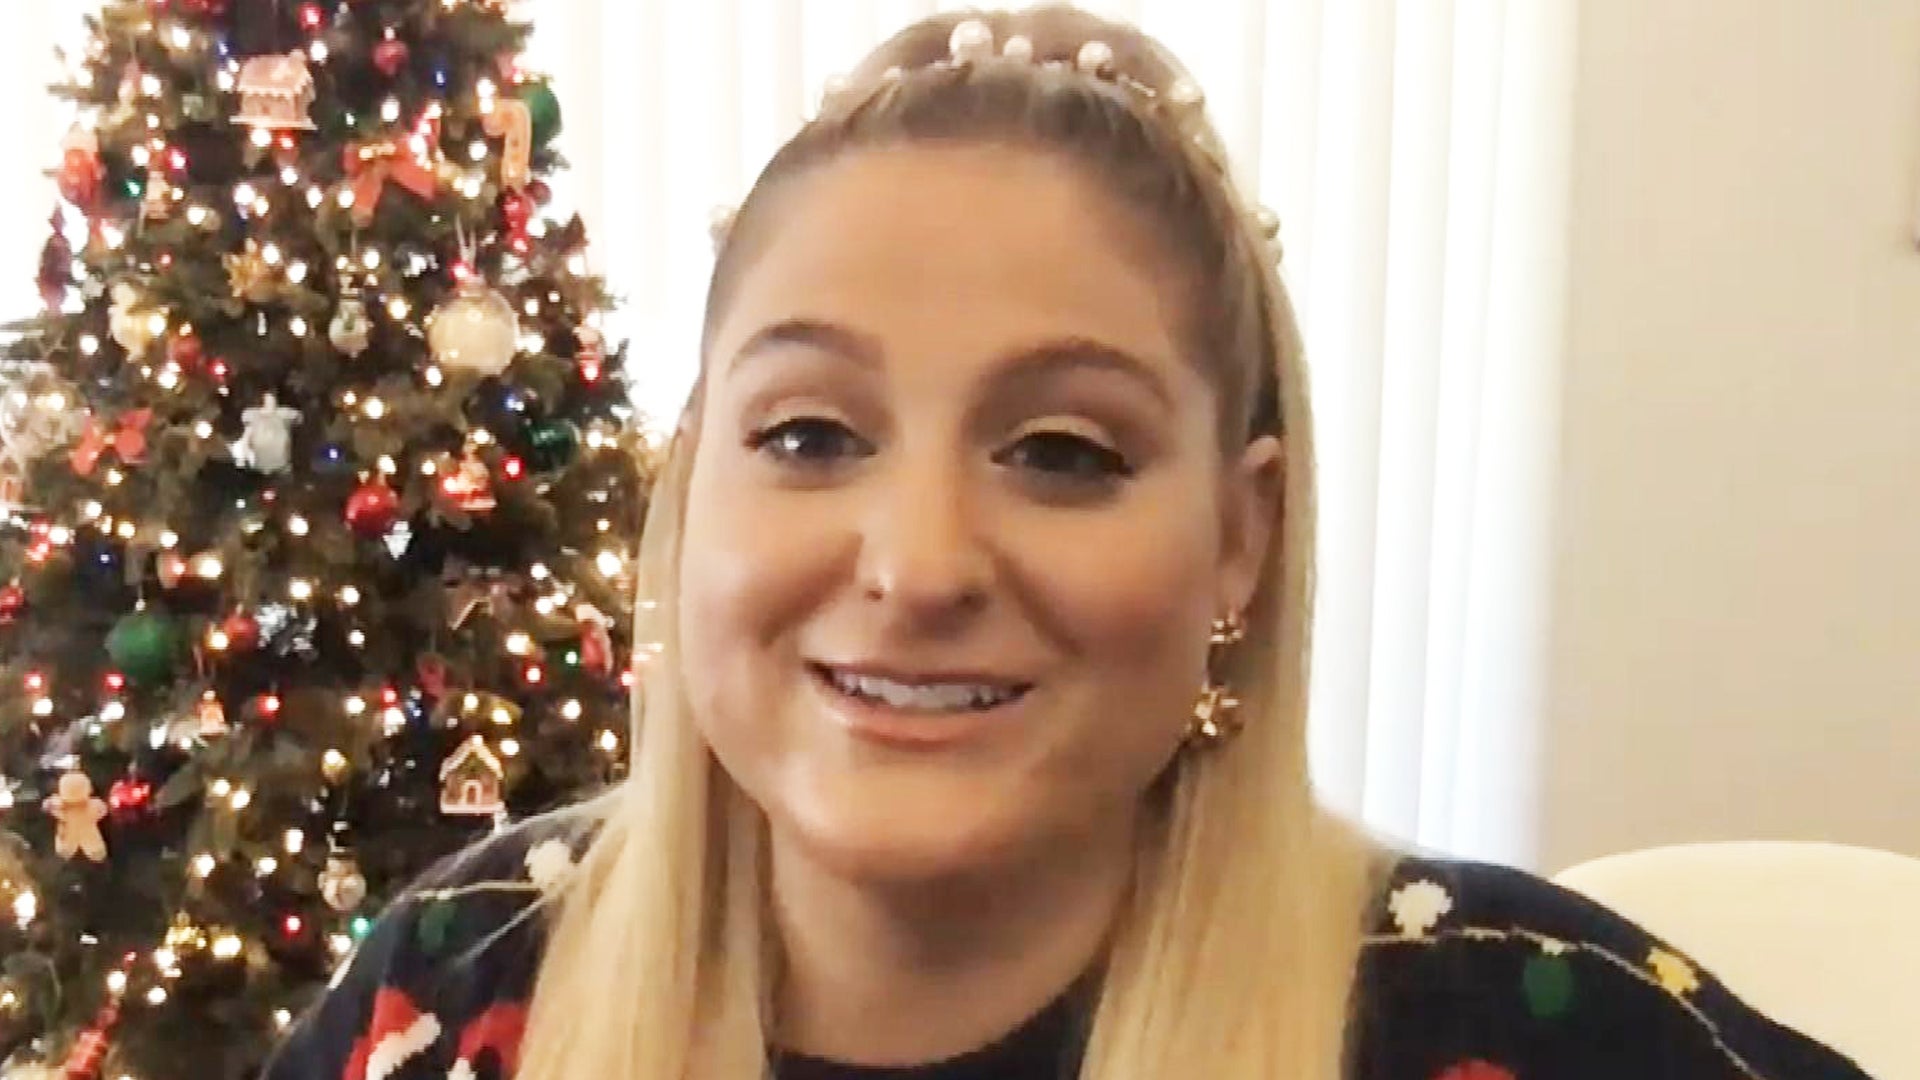 meghan trainor: Meghan Trainor welcomes second child, shares joy on  Instagram - The Economic Times